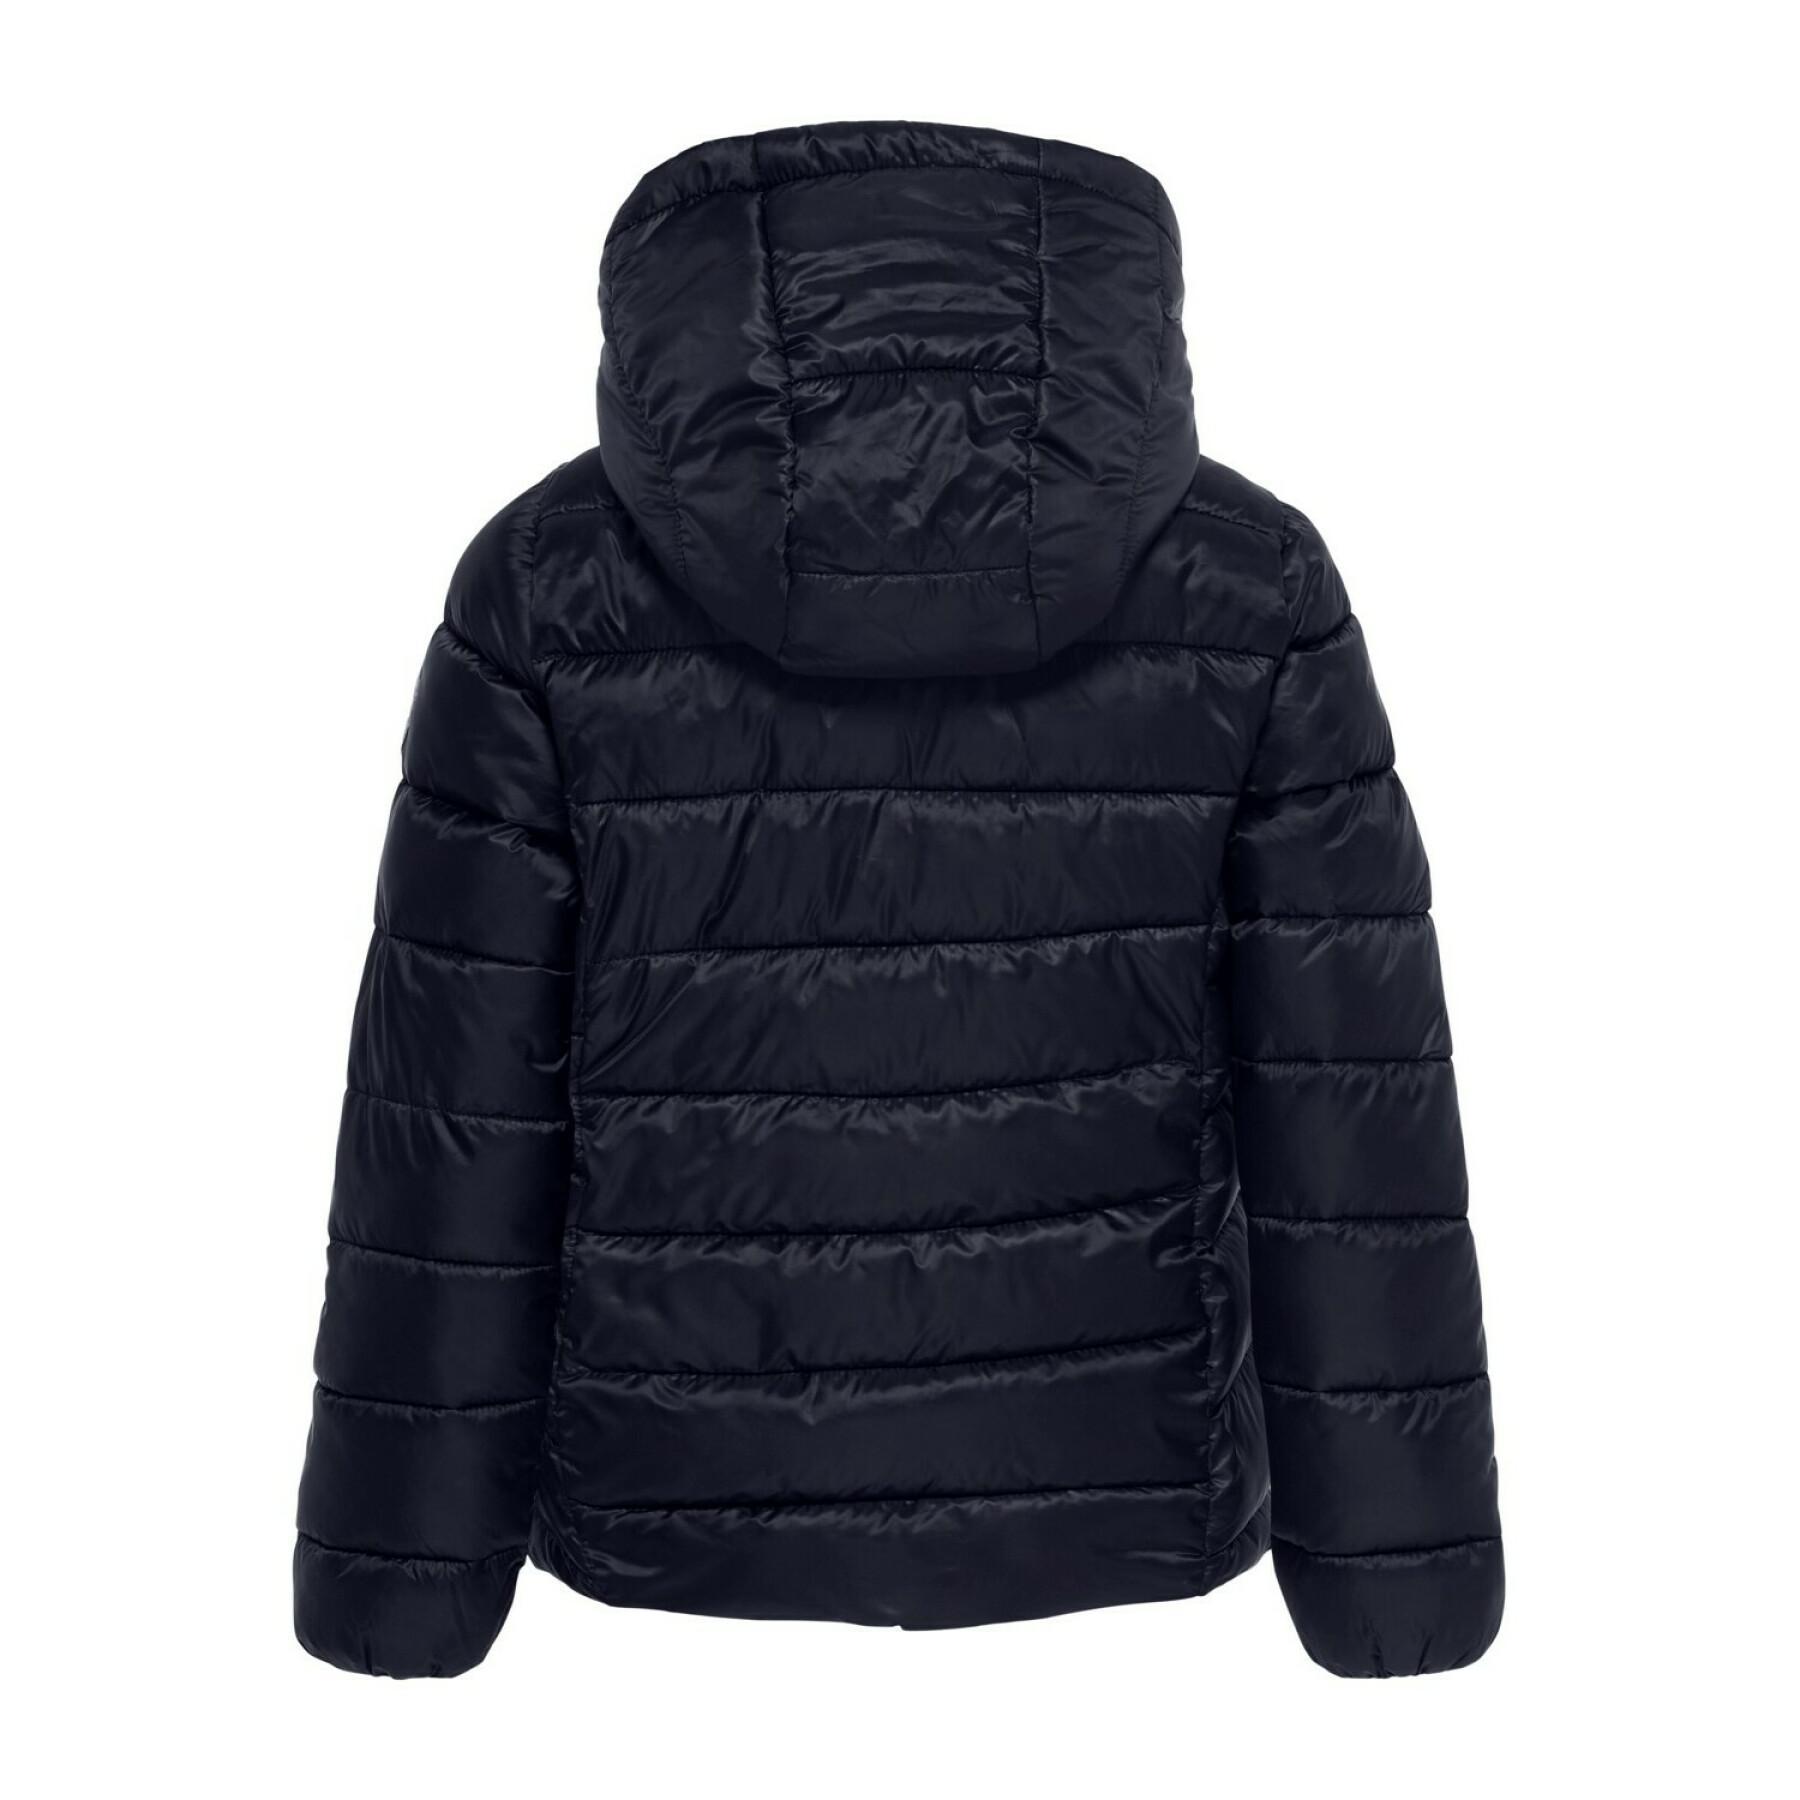 Girl's jacket Only kids kontanea quilted